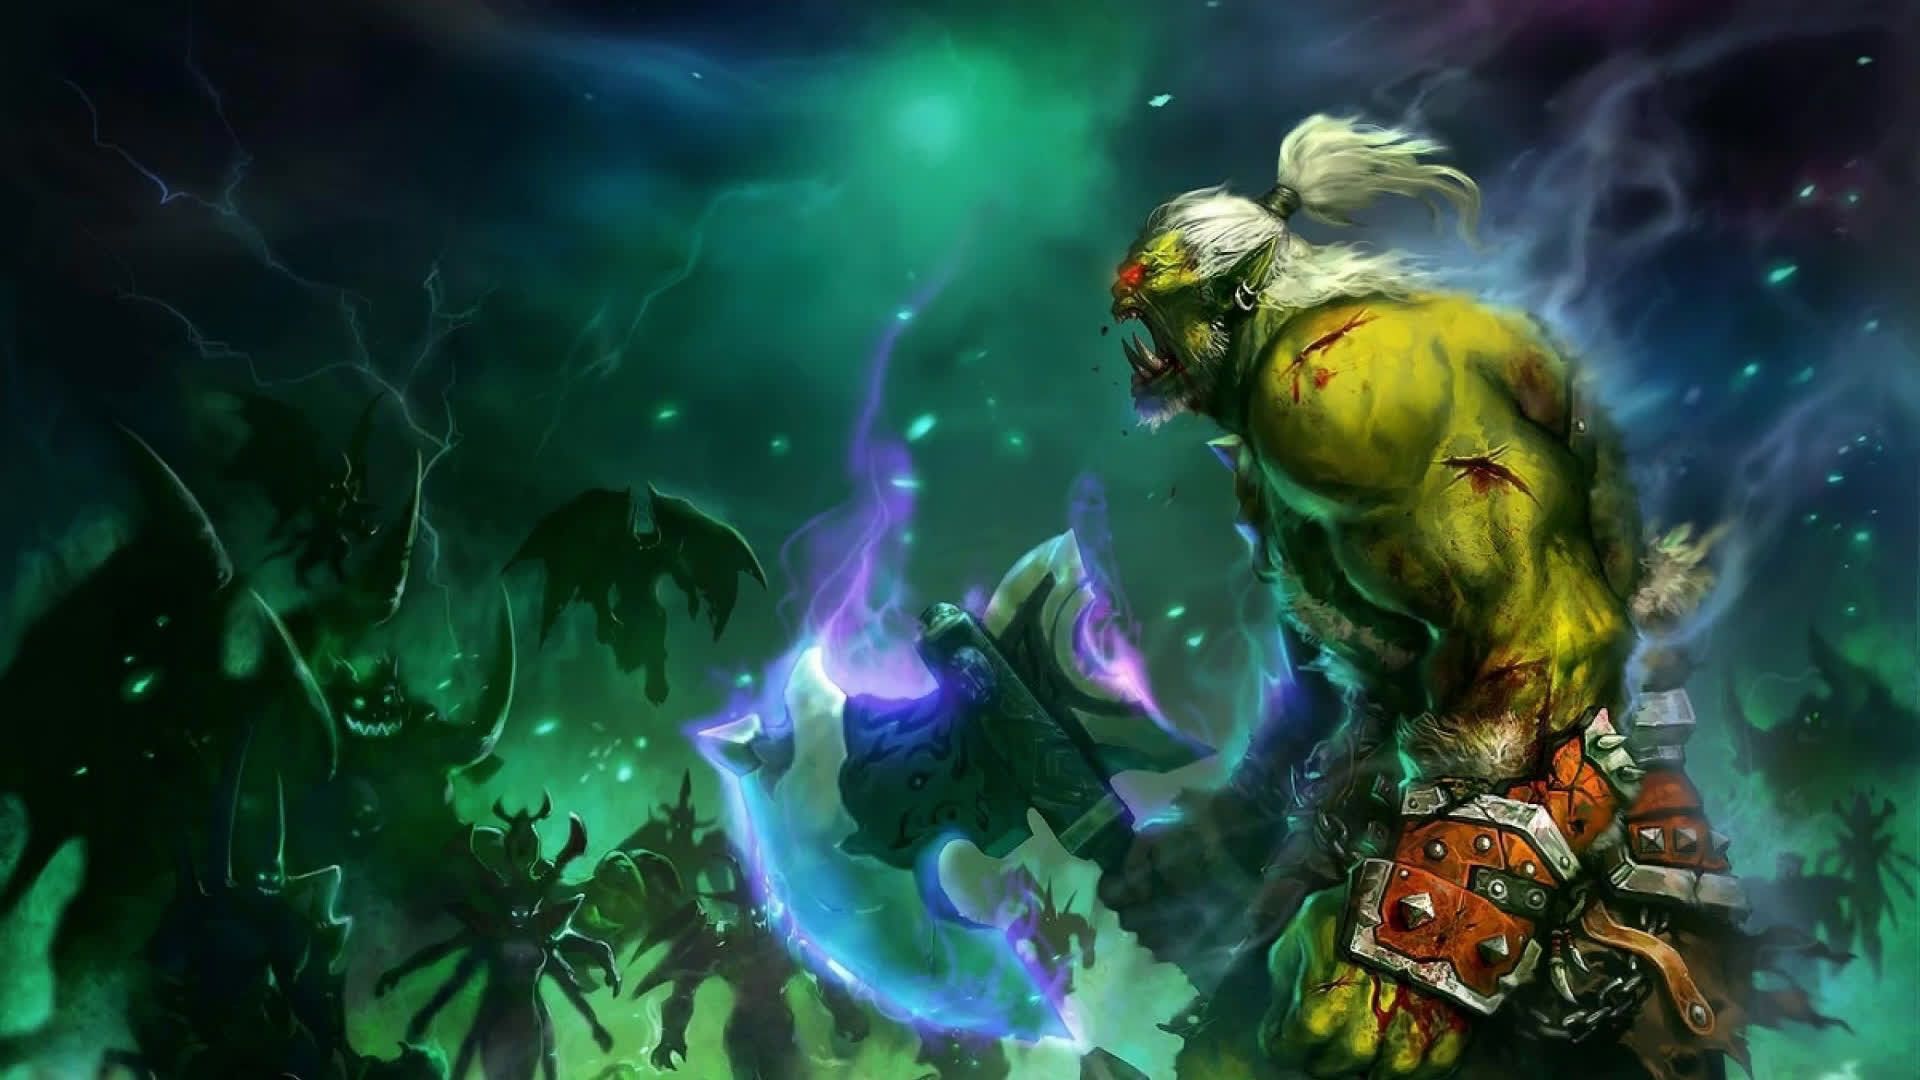 1920x World Of Warcraft Warrior Orc Live Wallpaper The Red